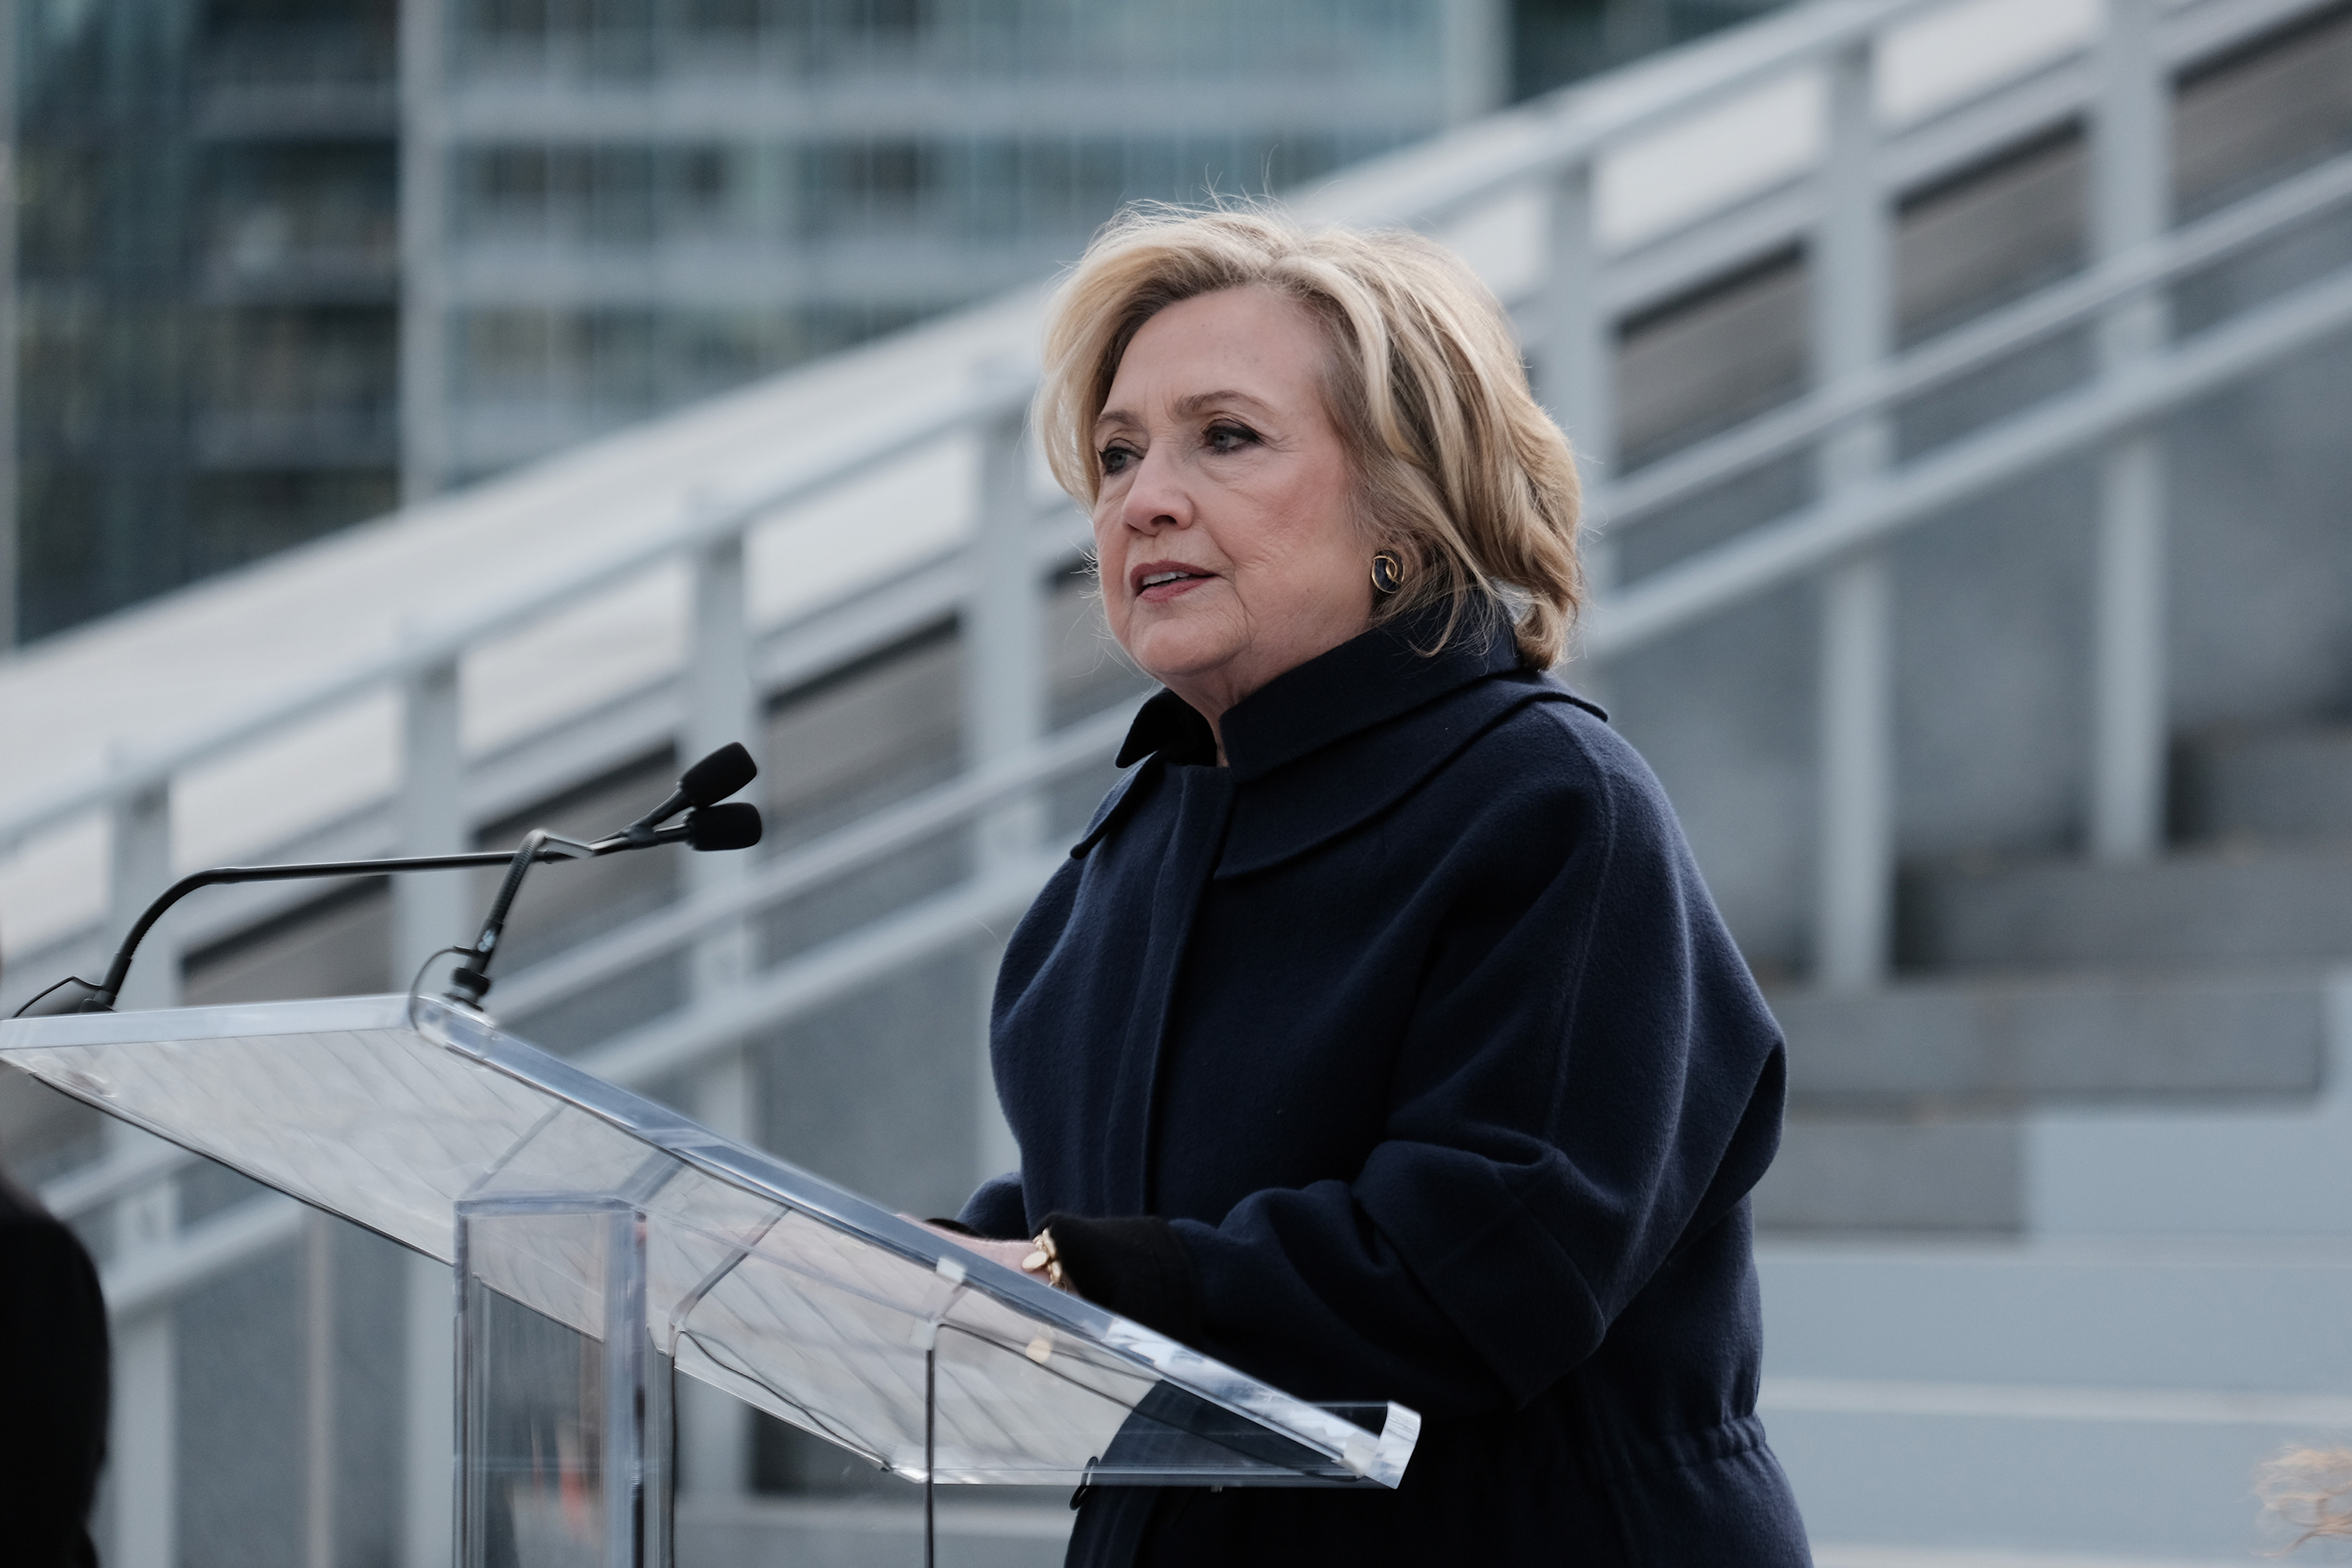 Former US Secretary of State Hillary Clinton speaks at the opening of the Eyes on Iran art exhibition at Roosevelt Island's FDR Four Freedoms State Park on November 28, in New York.